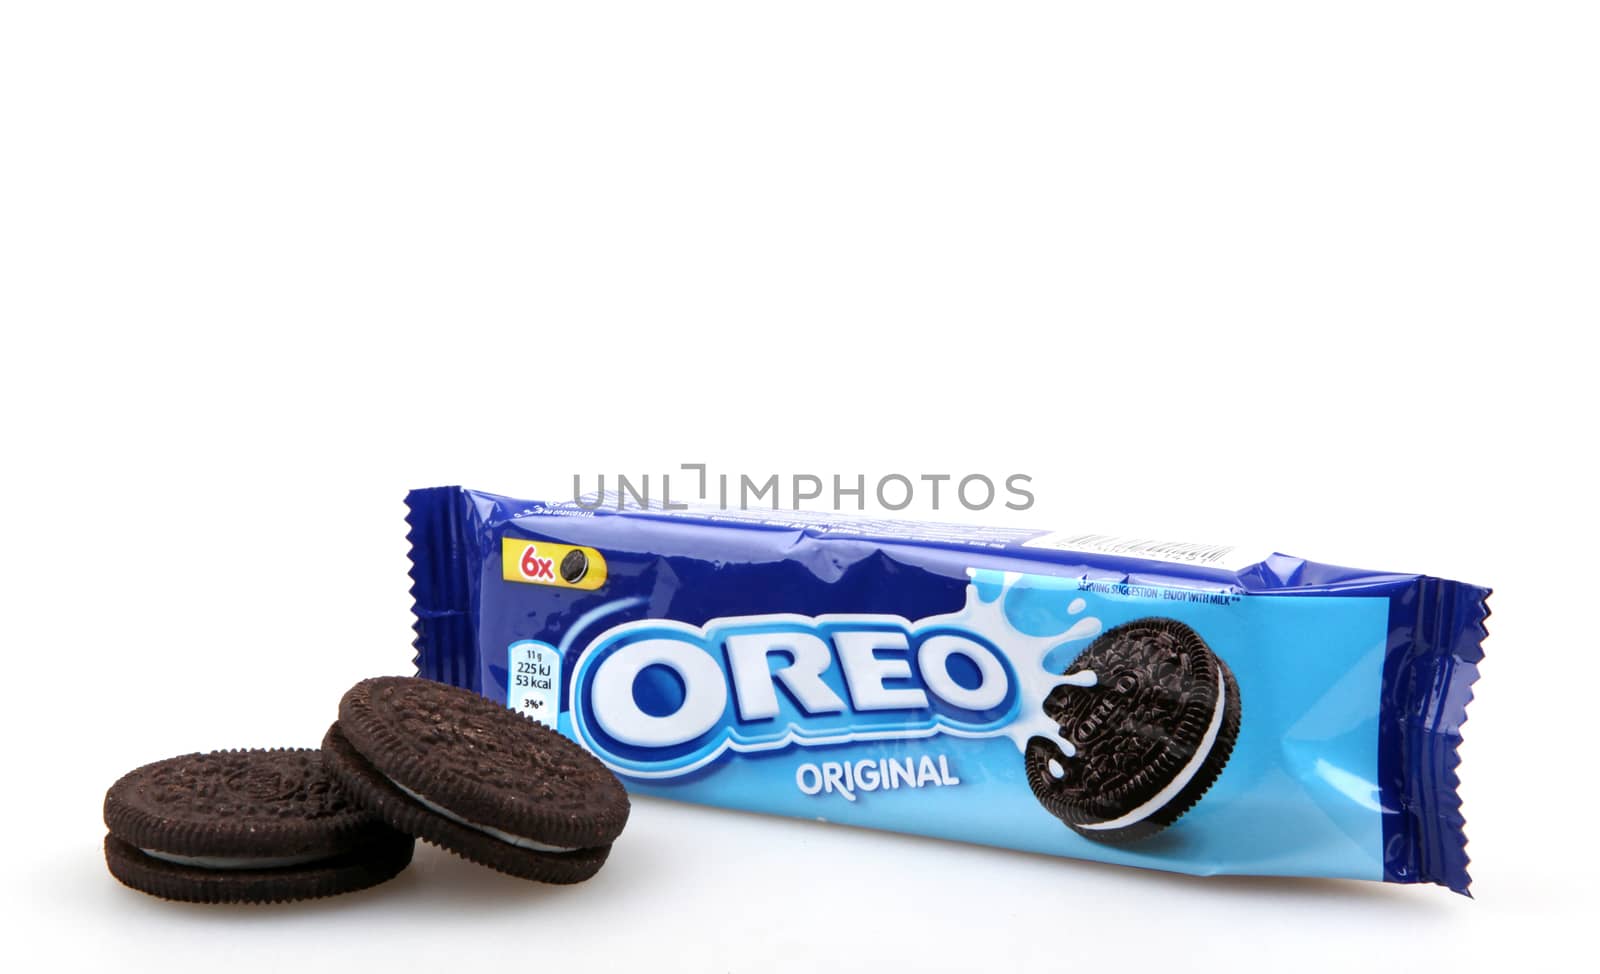 AYTOS, BULGARIA - DECEMBER 11, 2015: Oreo isolated on white background. Oreo is a sandwich cookie consisting of two chocolate disks with a sweet cream filling in between. by nenov